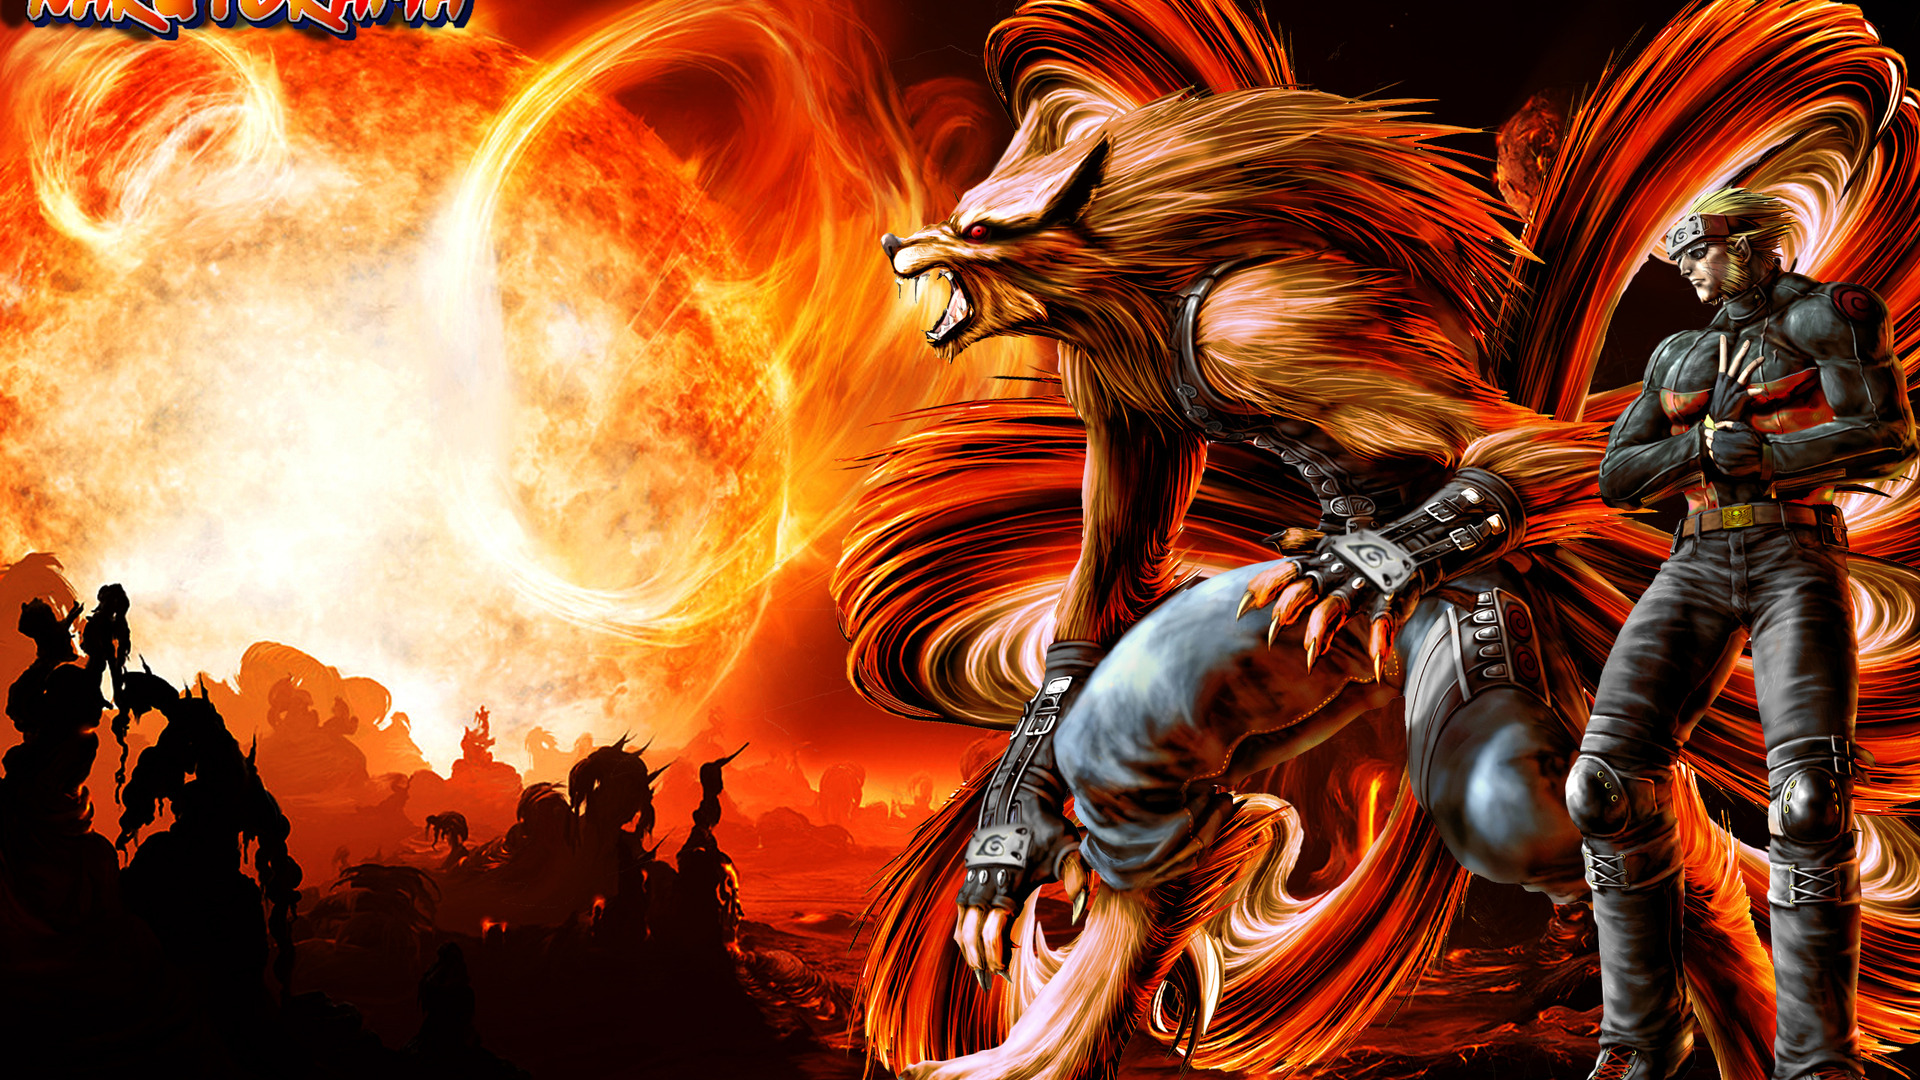 Nine Tails and Naruto, 1920x1080 HD Wallpaper and FREE Stock Photo